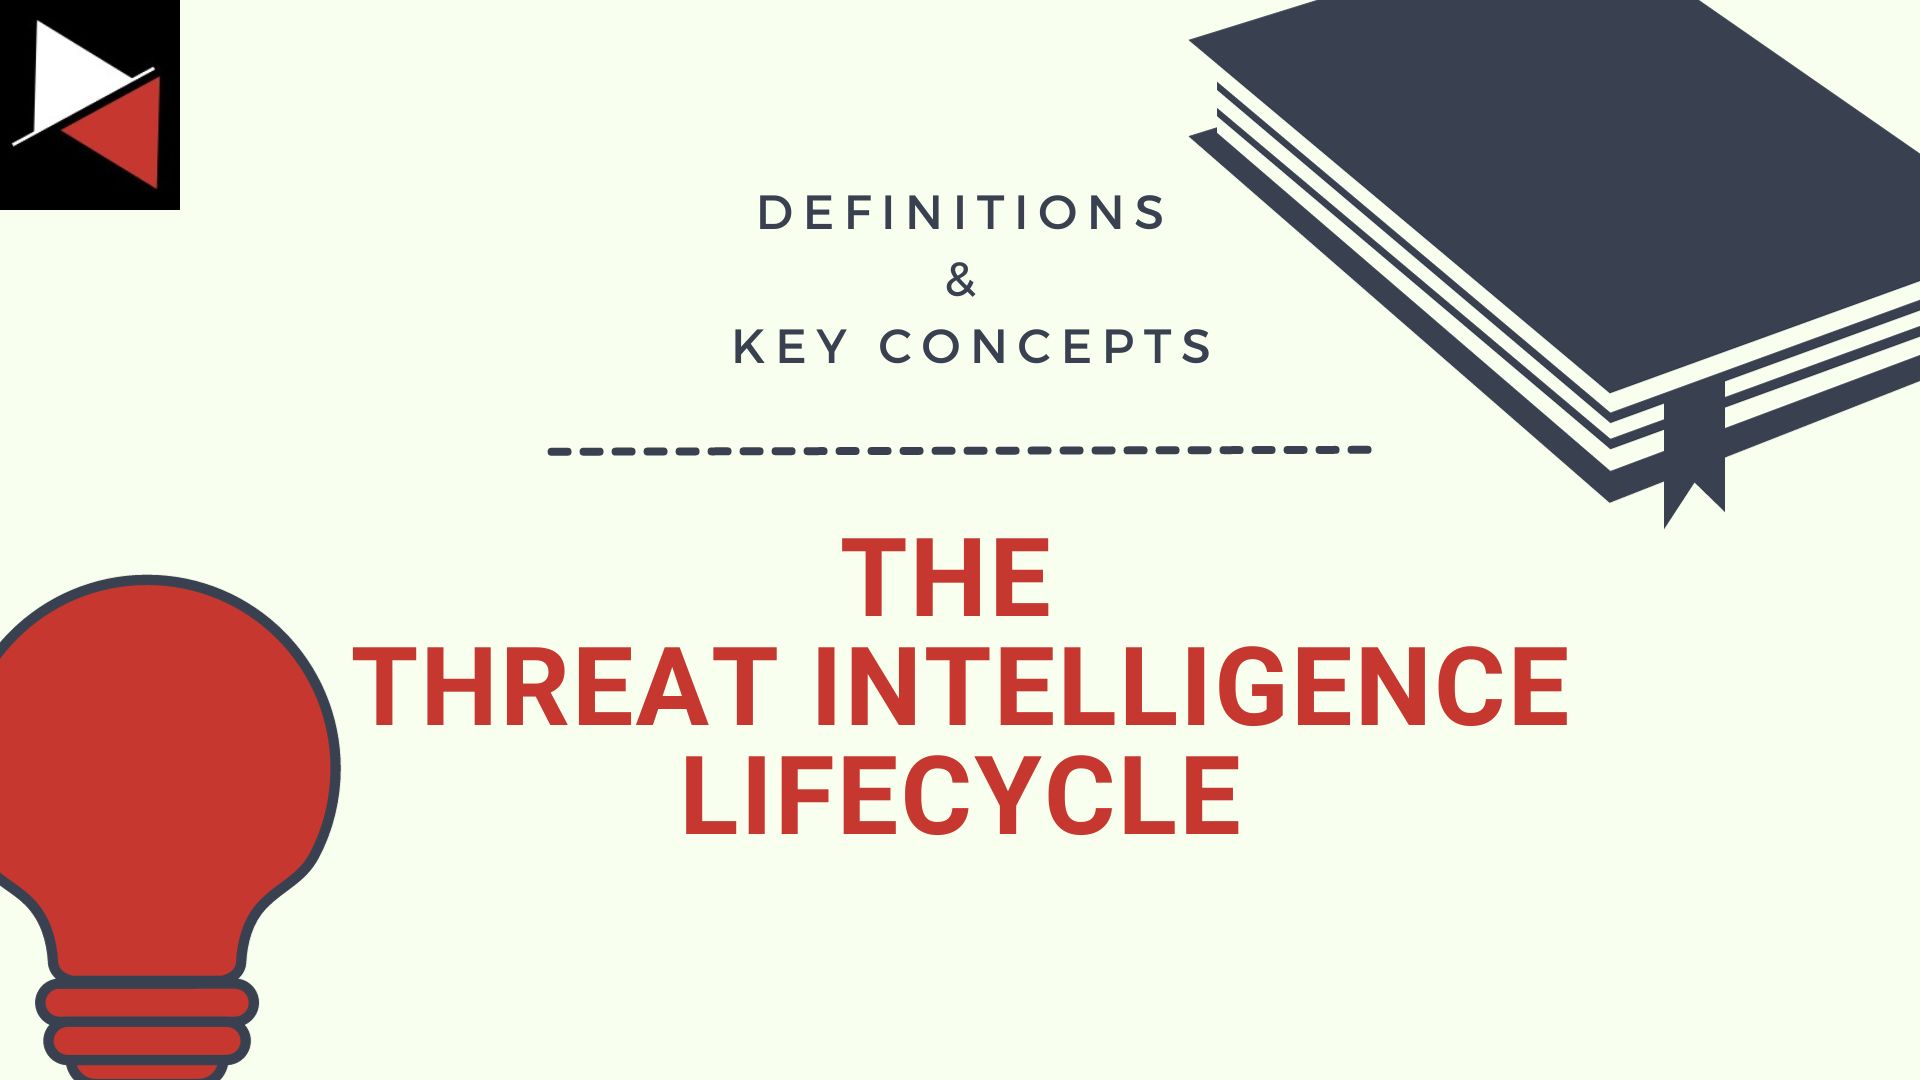 The cyber threat intelligence lifecycle